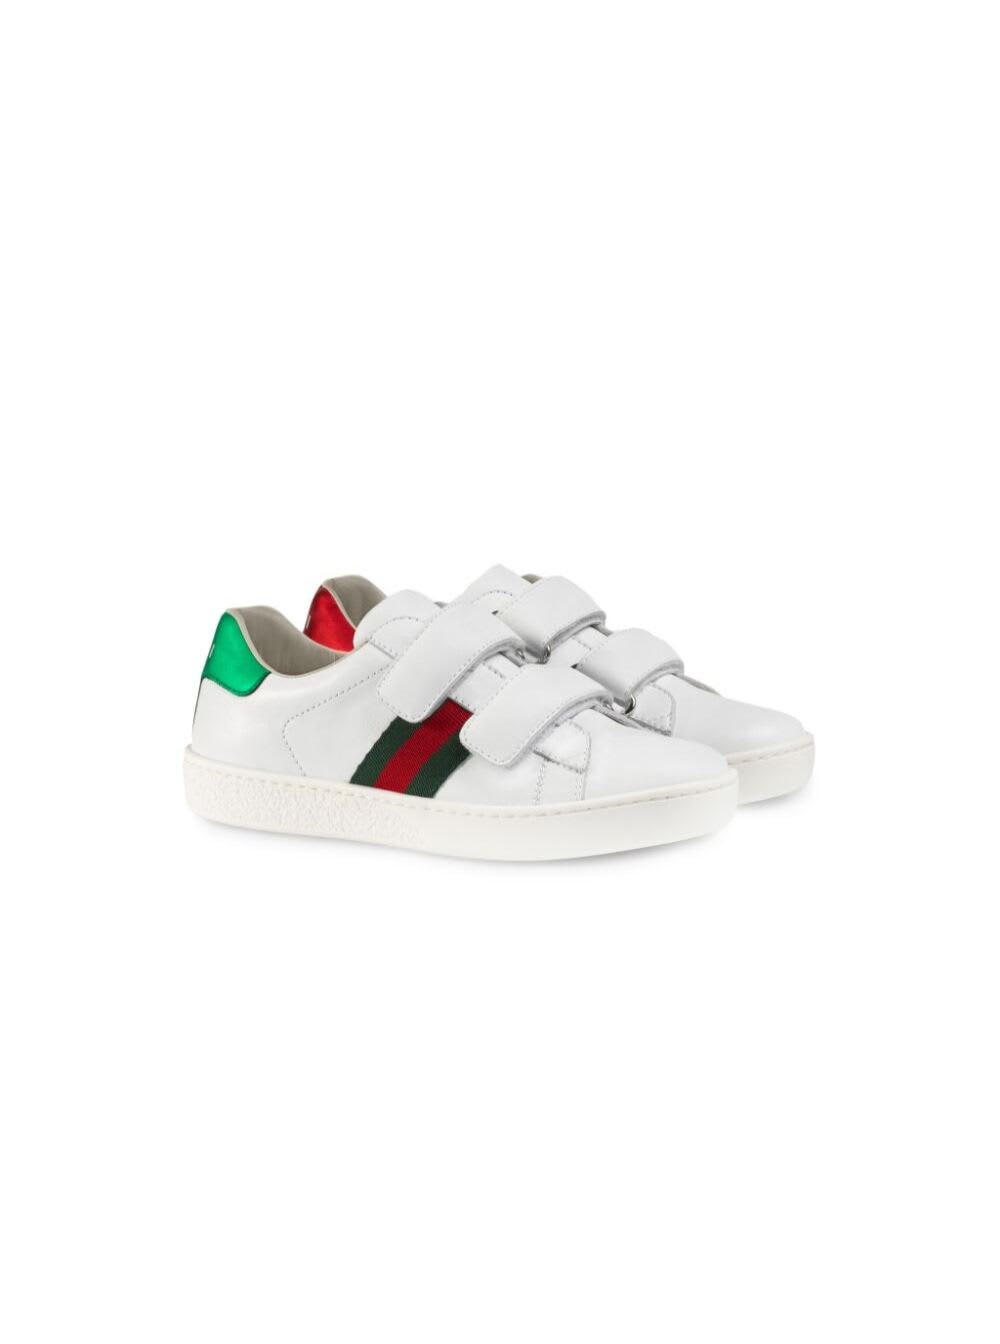 Gucci Kids' Ace Leather Sneakers In White